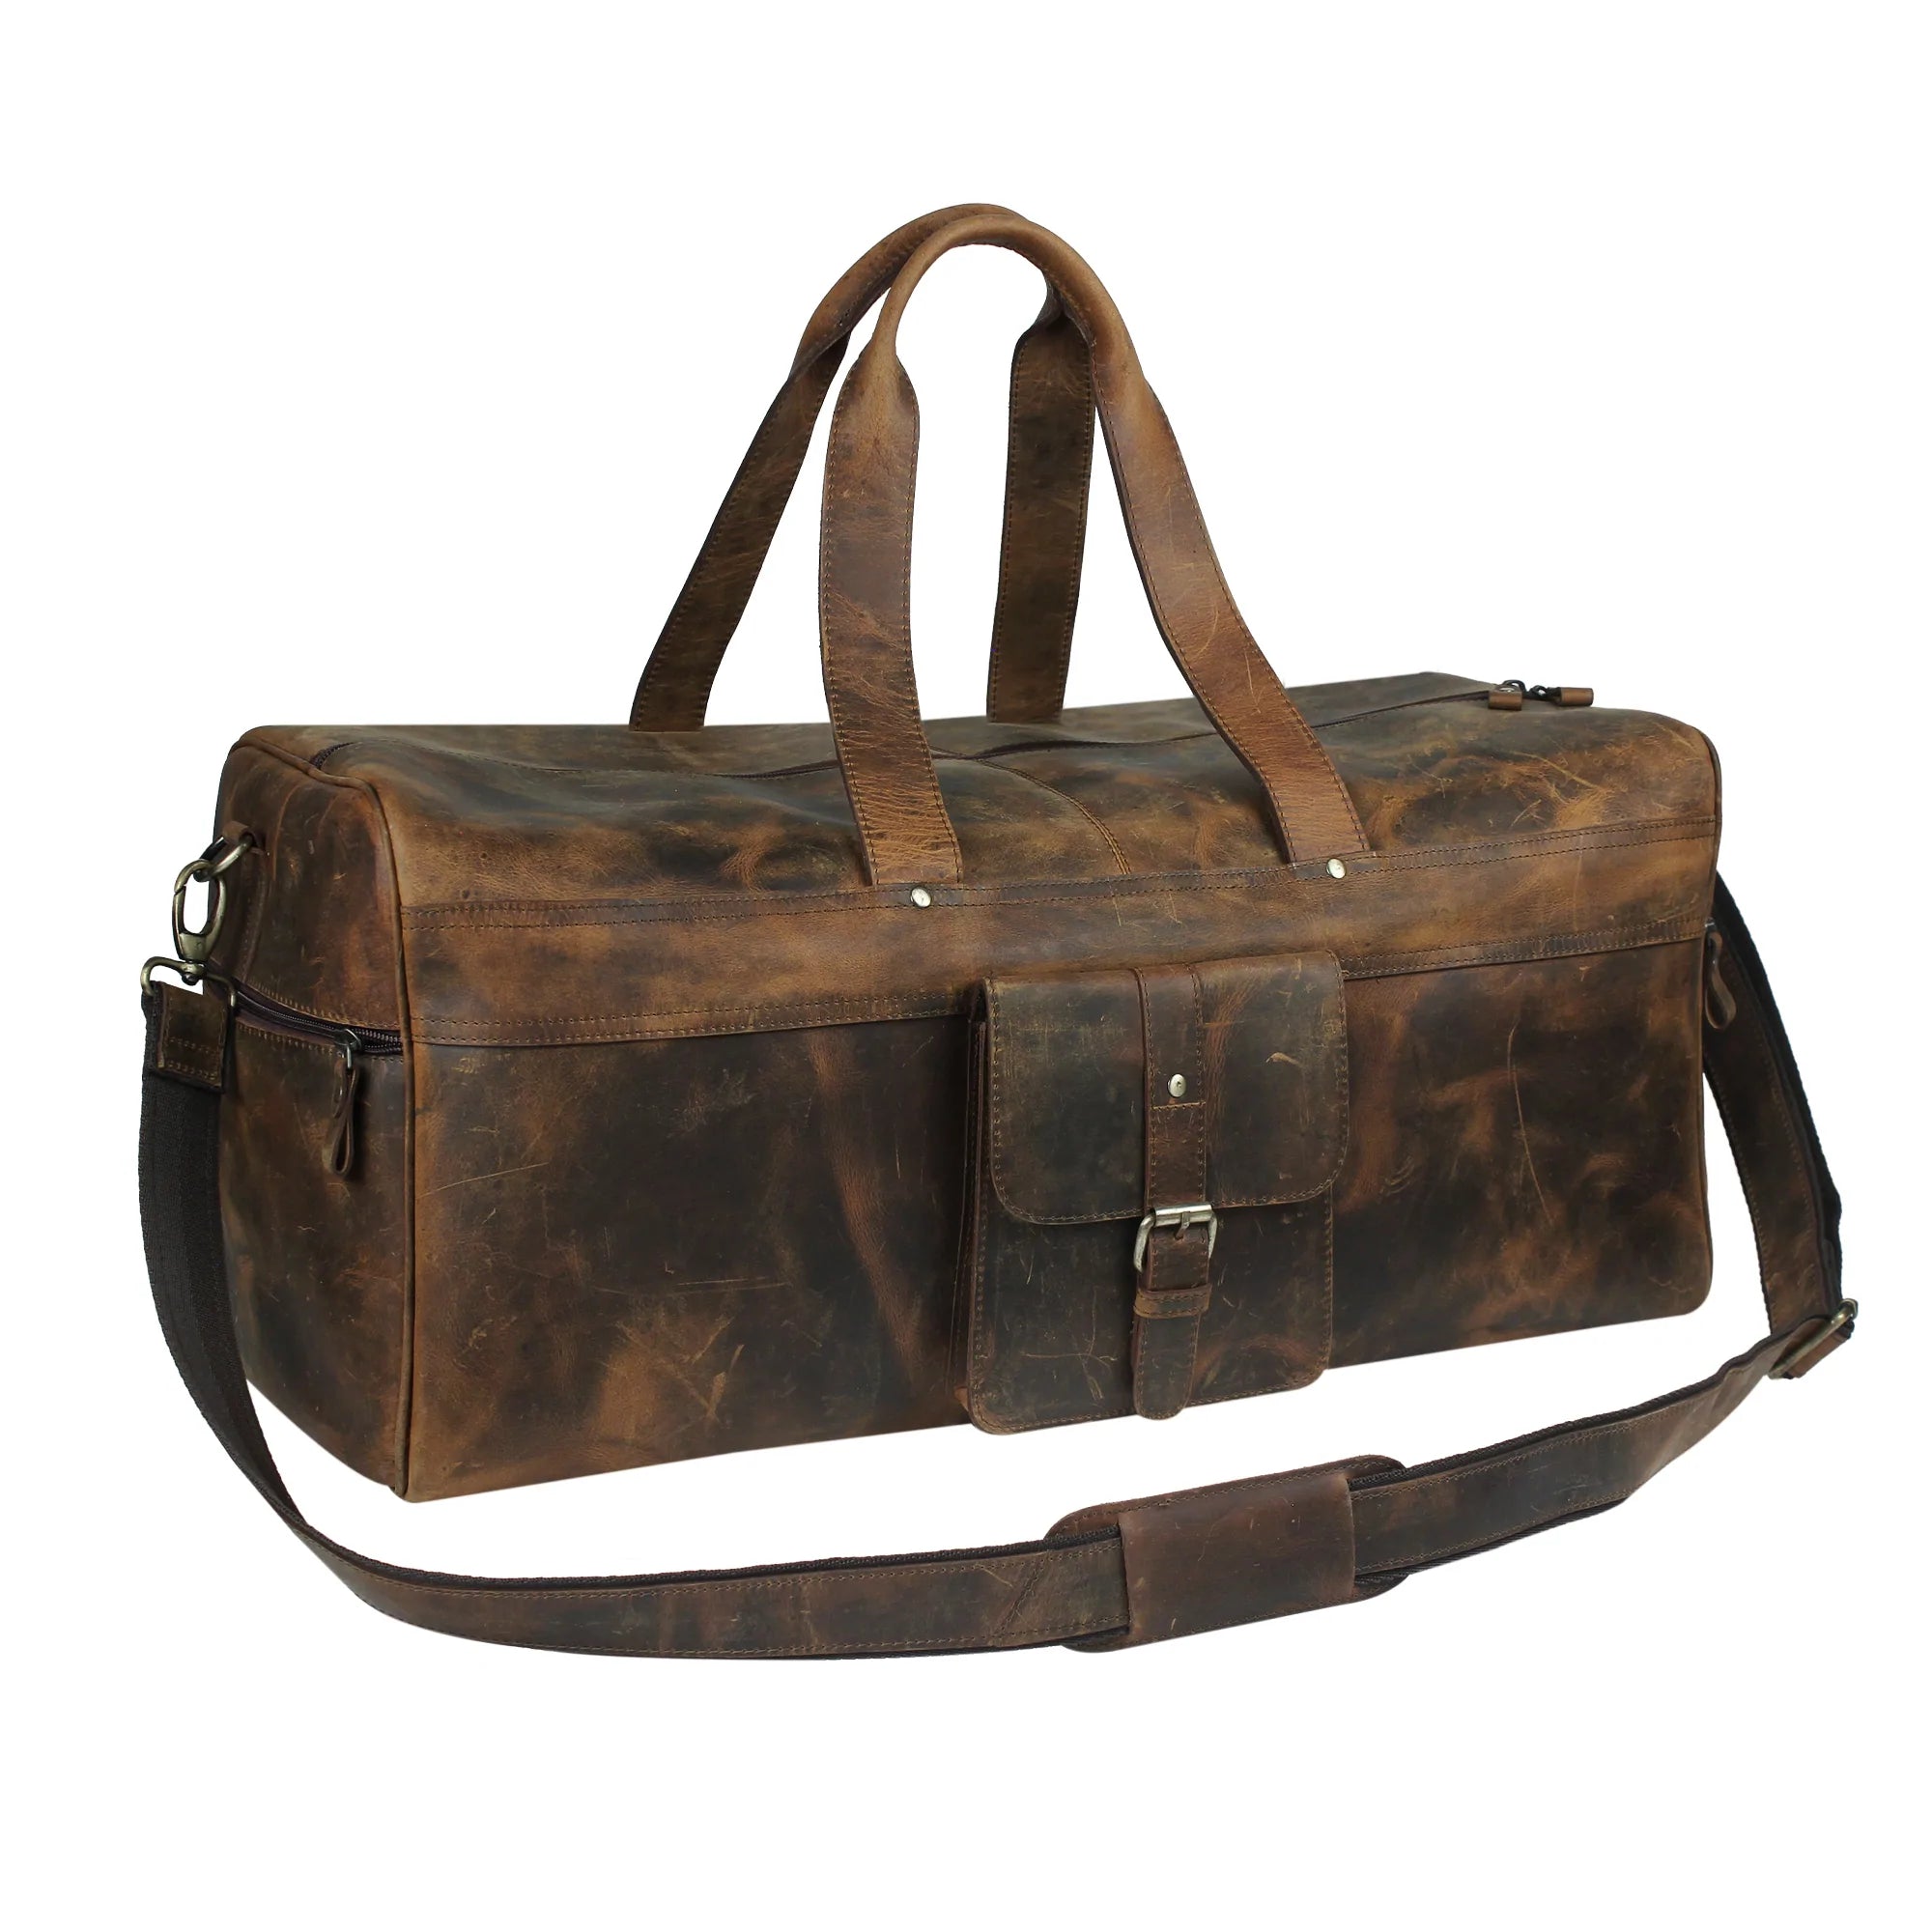 Distressed Leather Duffle Bag